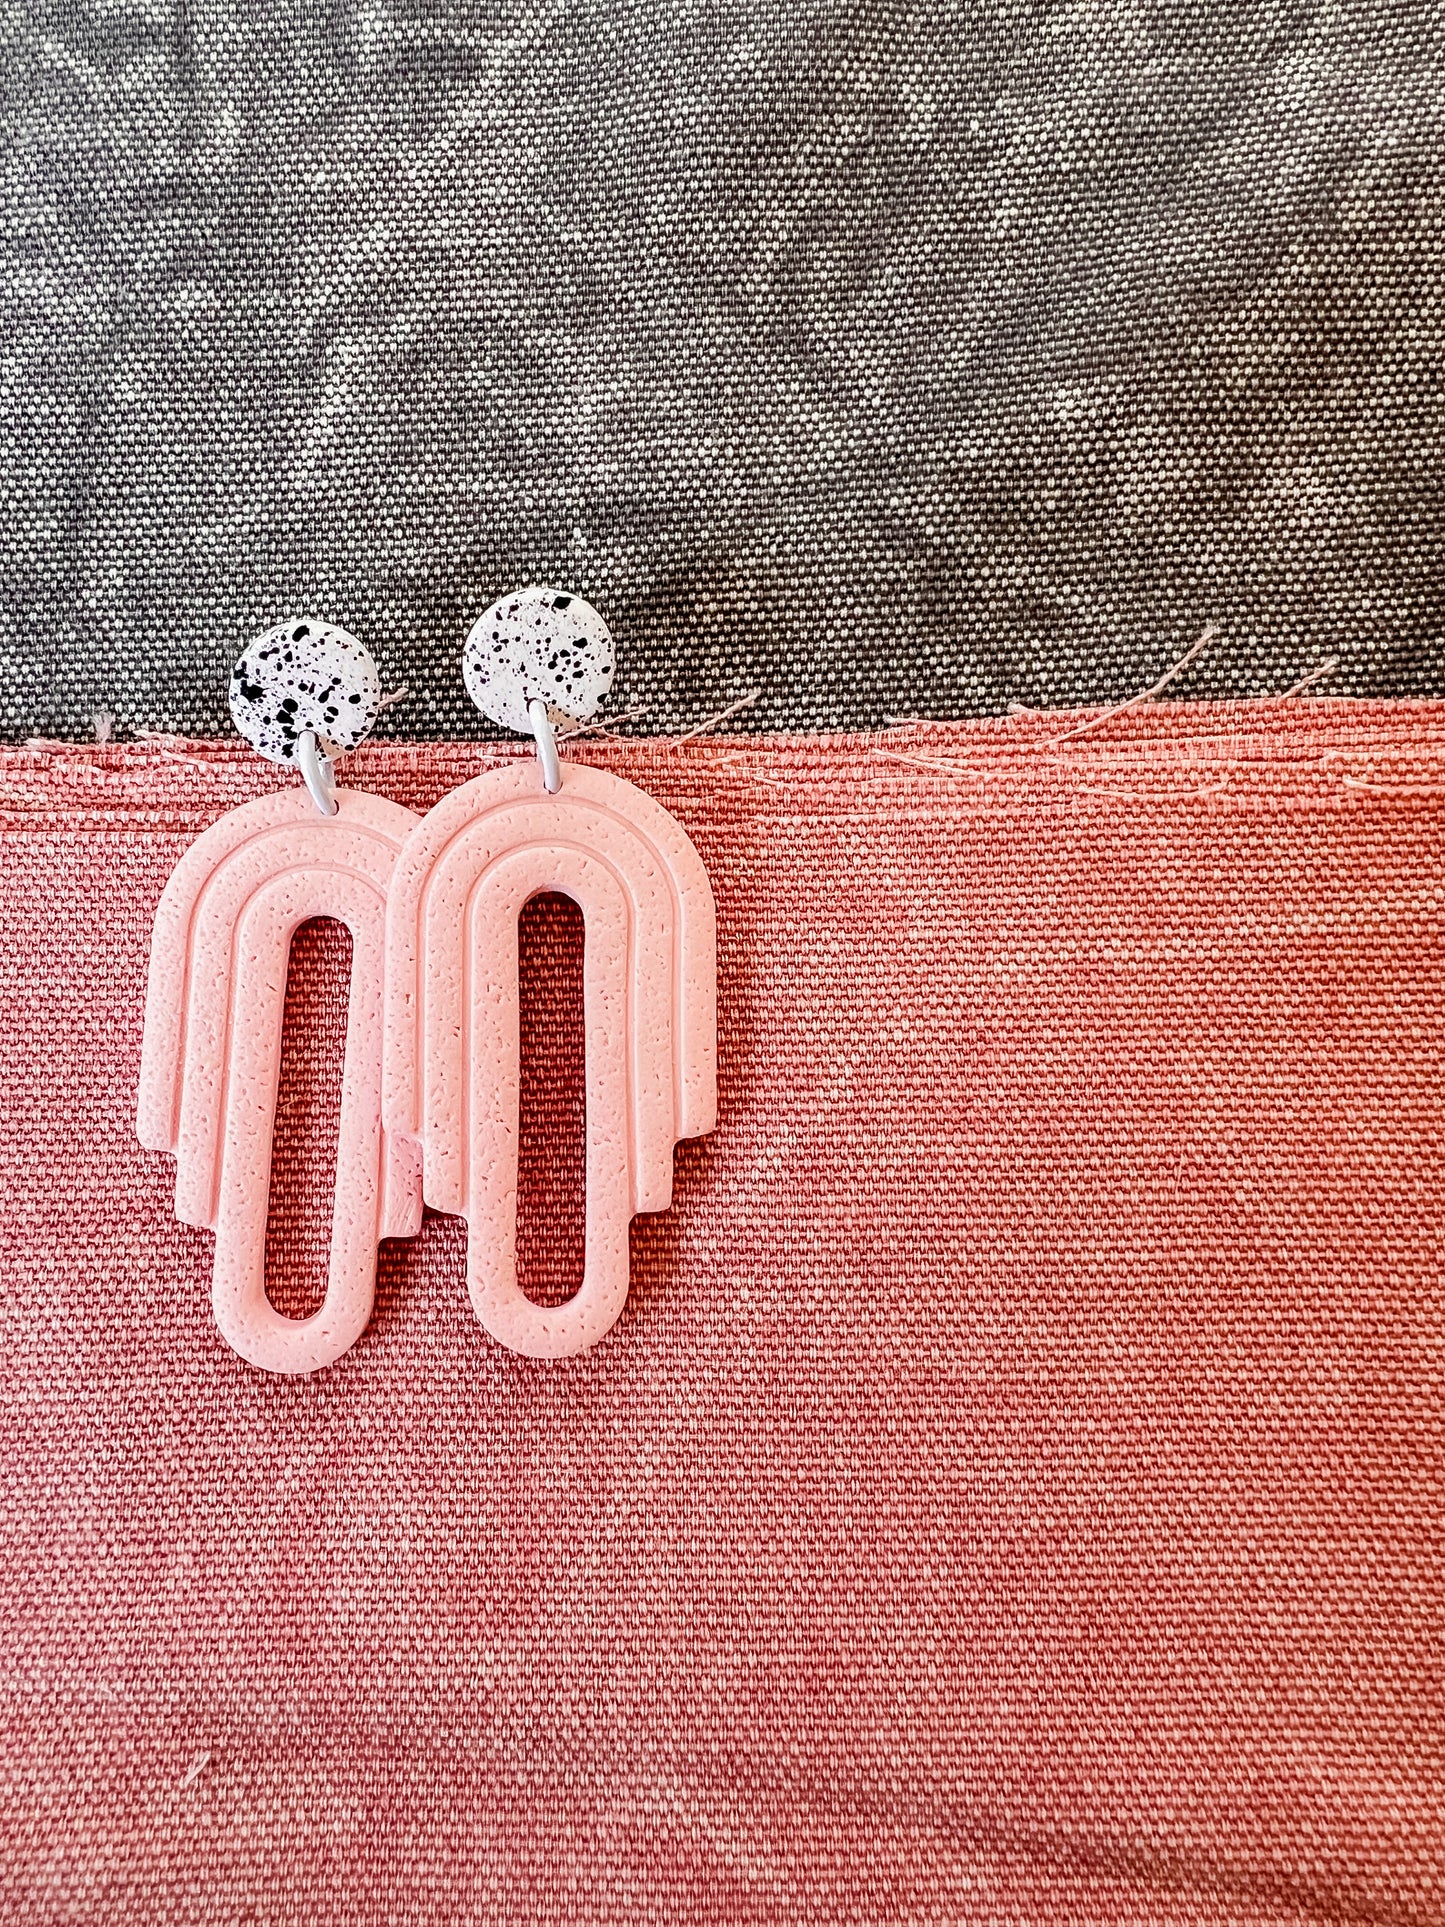 Cathedral | Clay Earrings